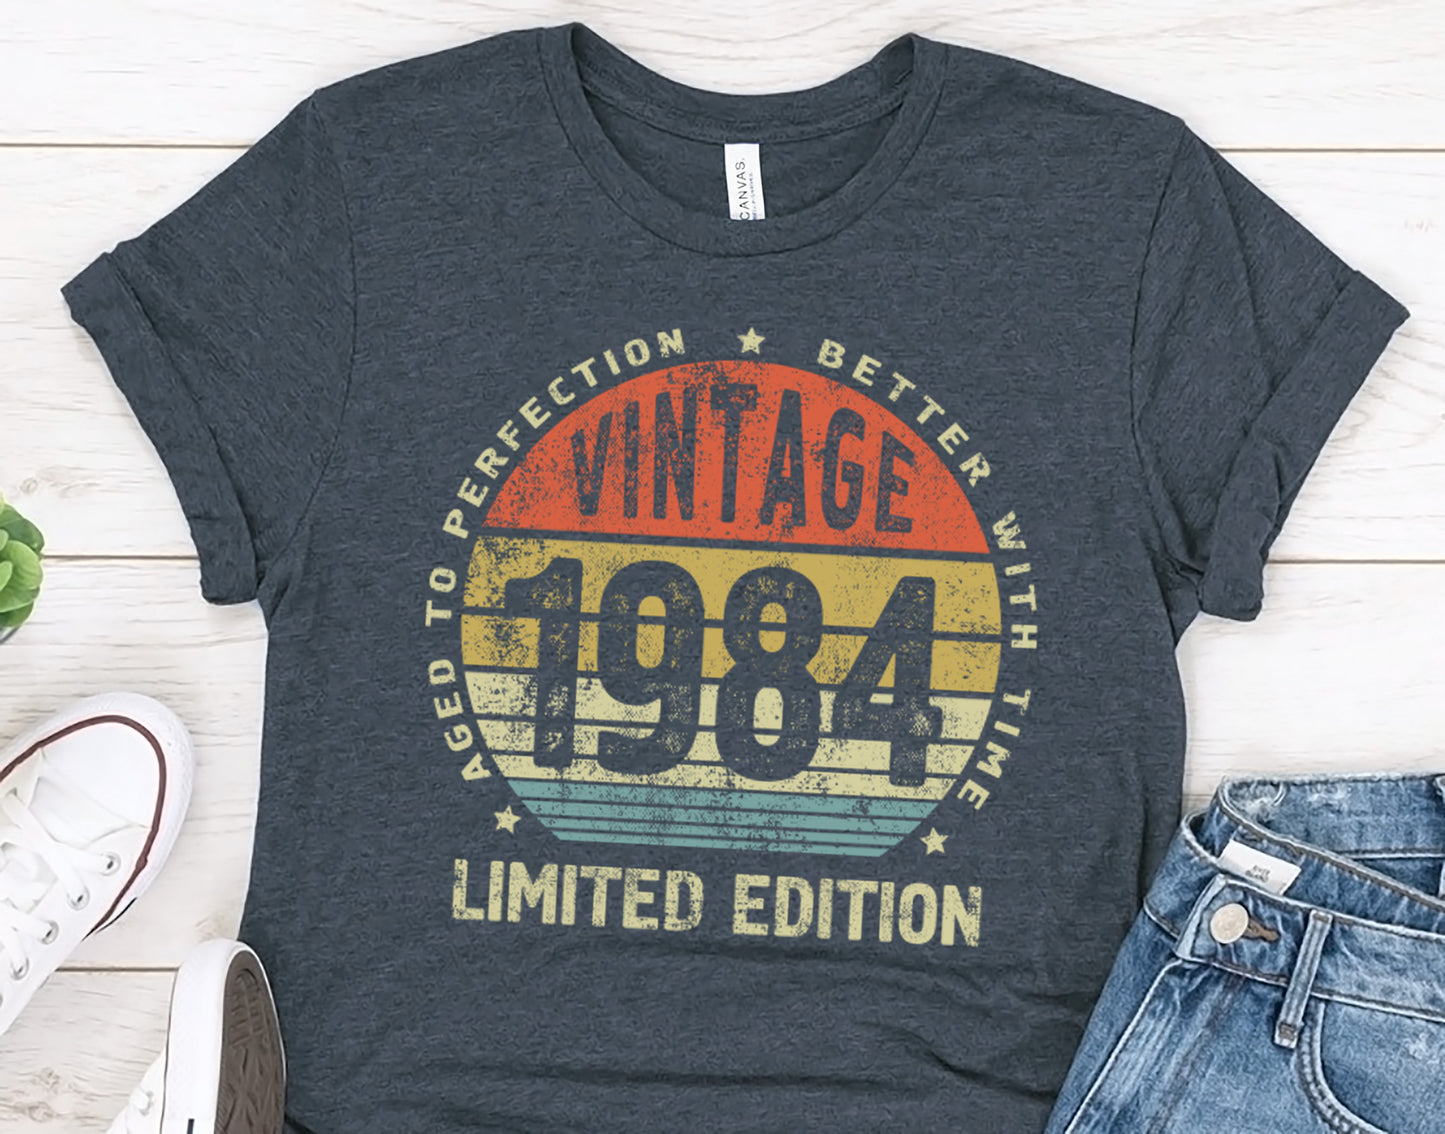 40th birthday gifts, Vintage 1984 Shirt, Aged to Perfection Better with Time